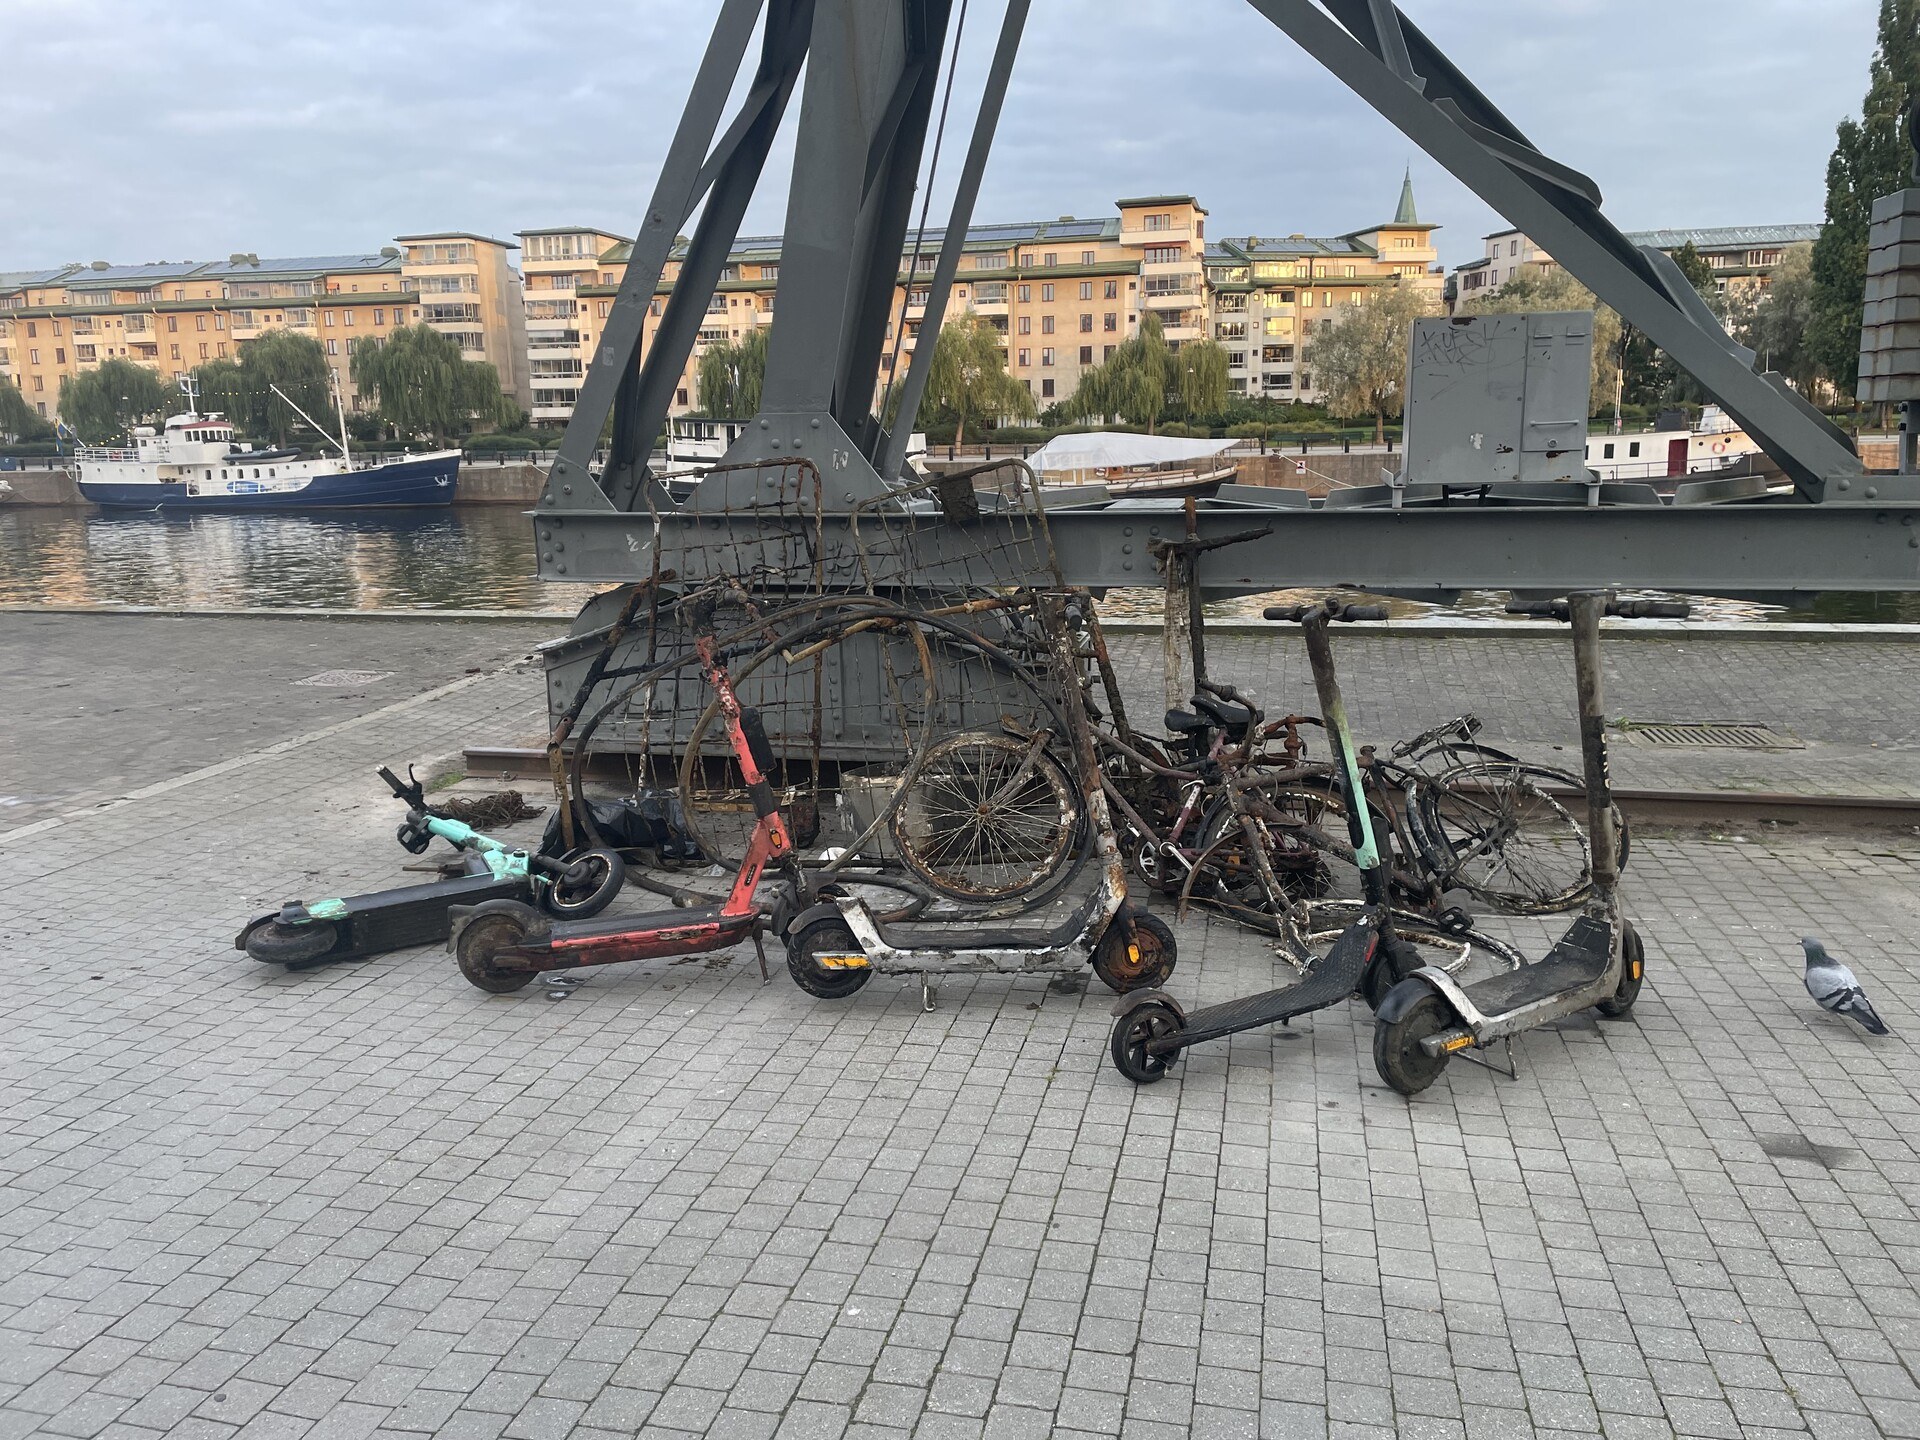 A handful of rusty bikes and grimy electric scooters left by the iron legs of an old fixed crane on the canalside